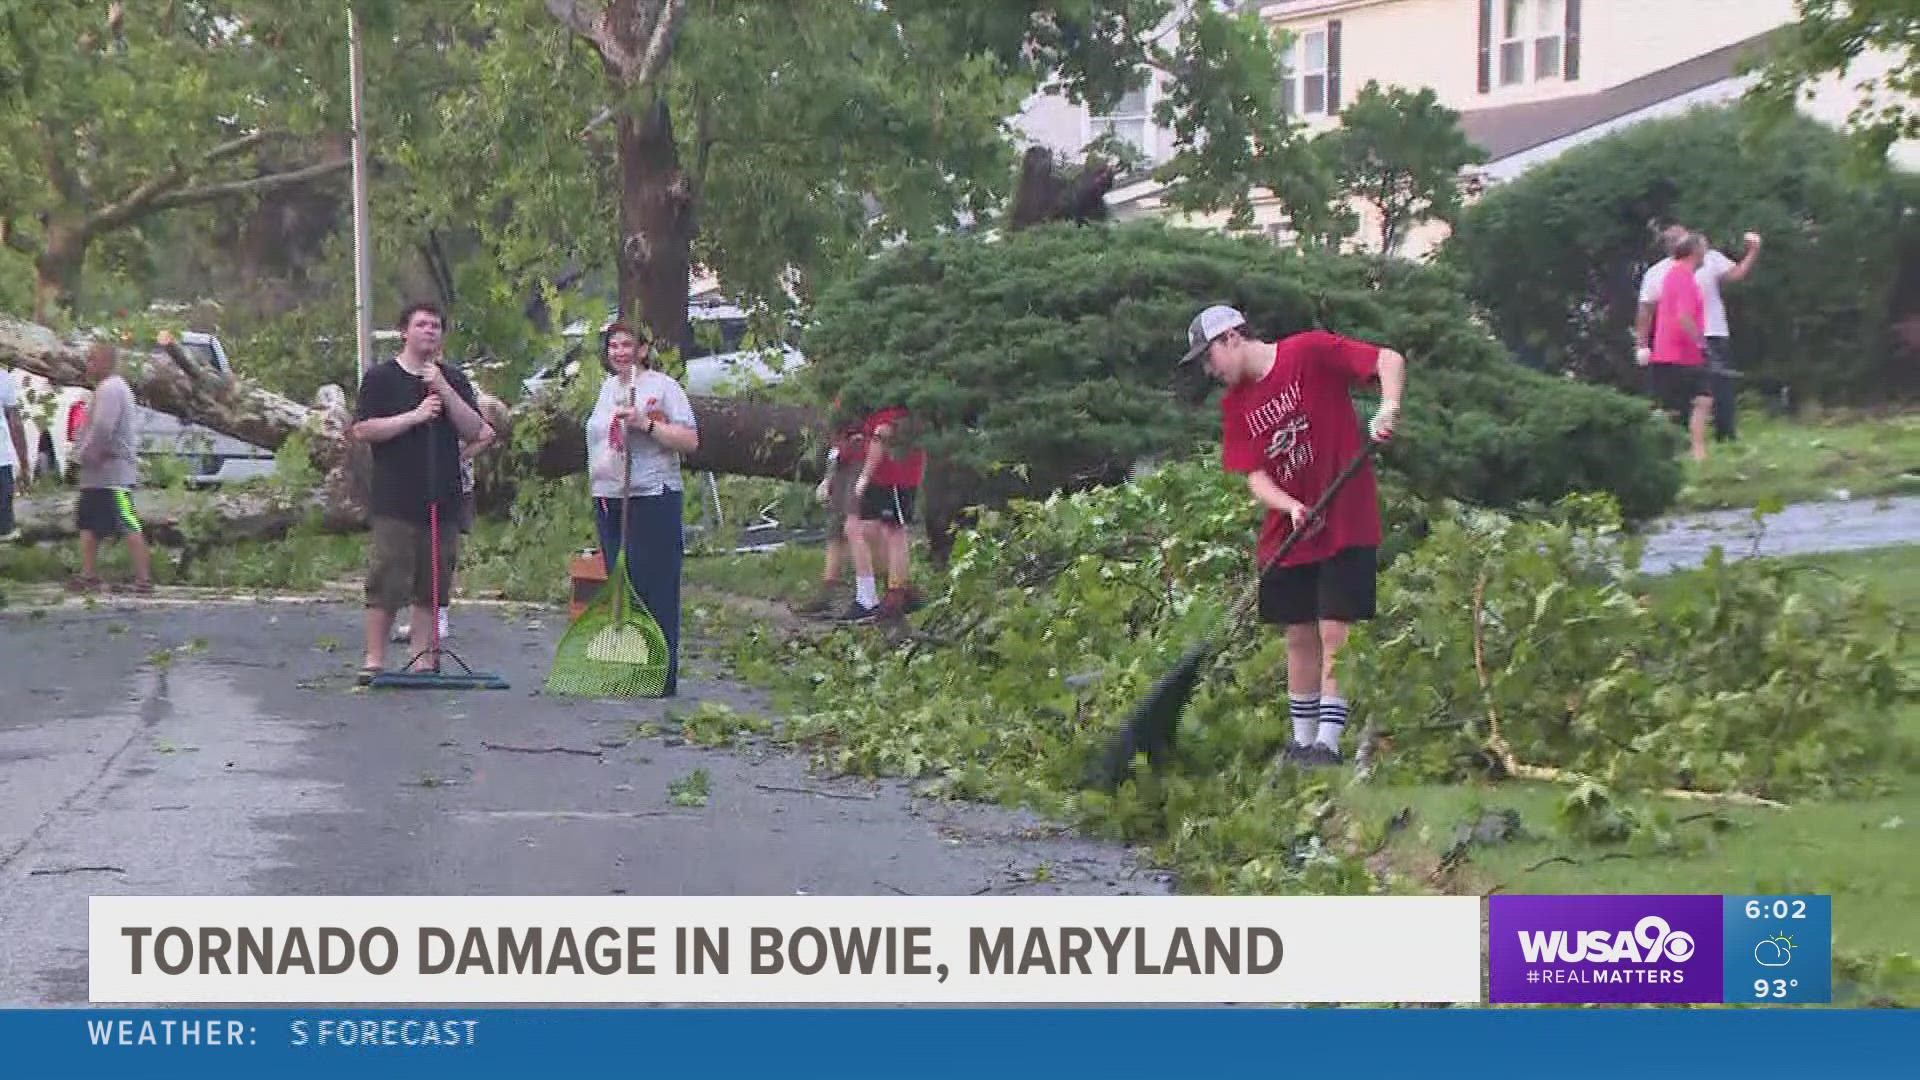 Bowie, Maryland was hit by an EF-1 tornado on July 5. The community is recovering from the damage.